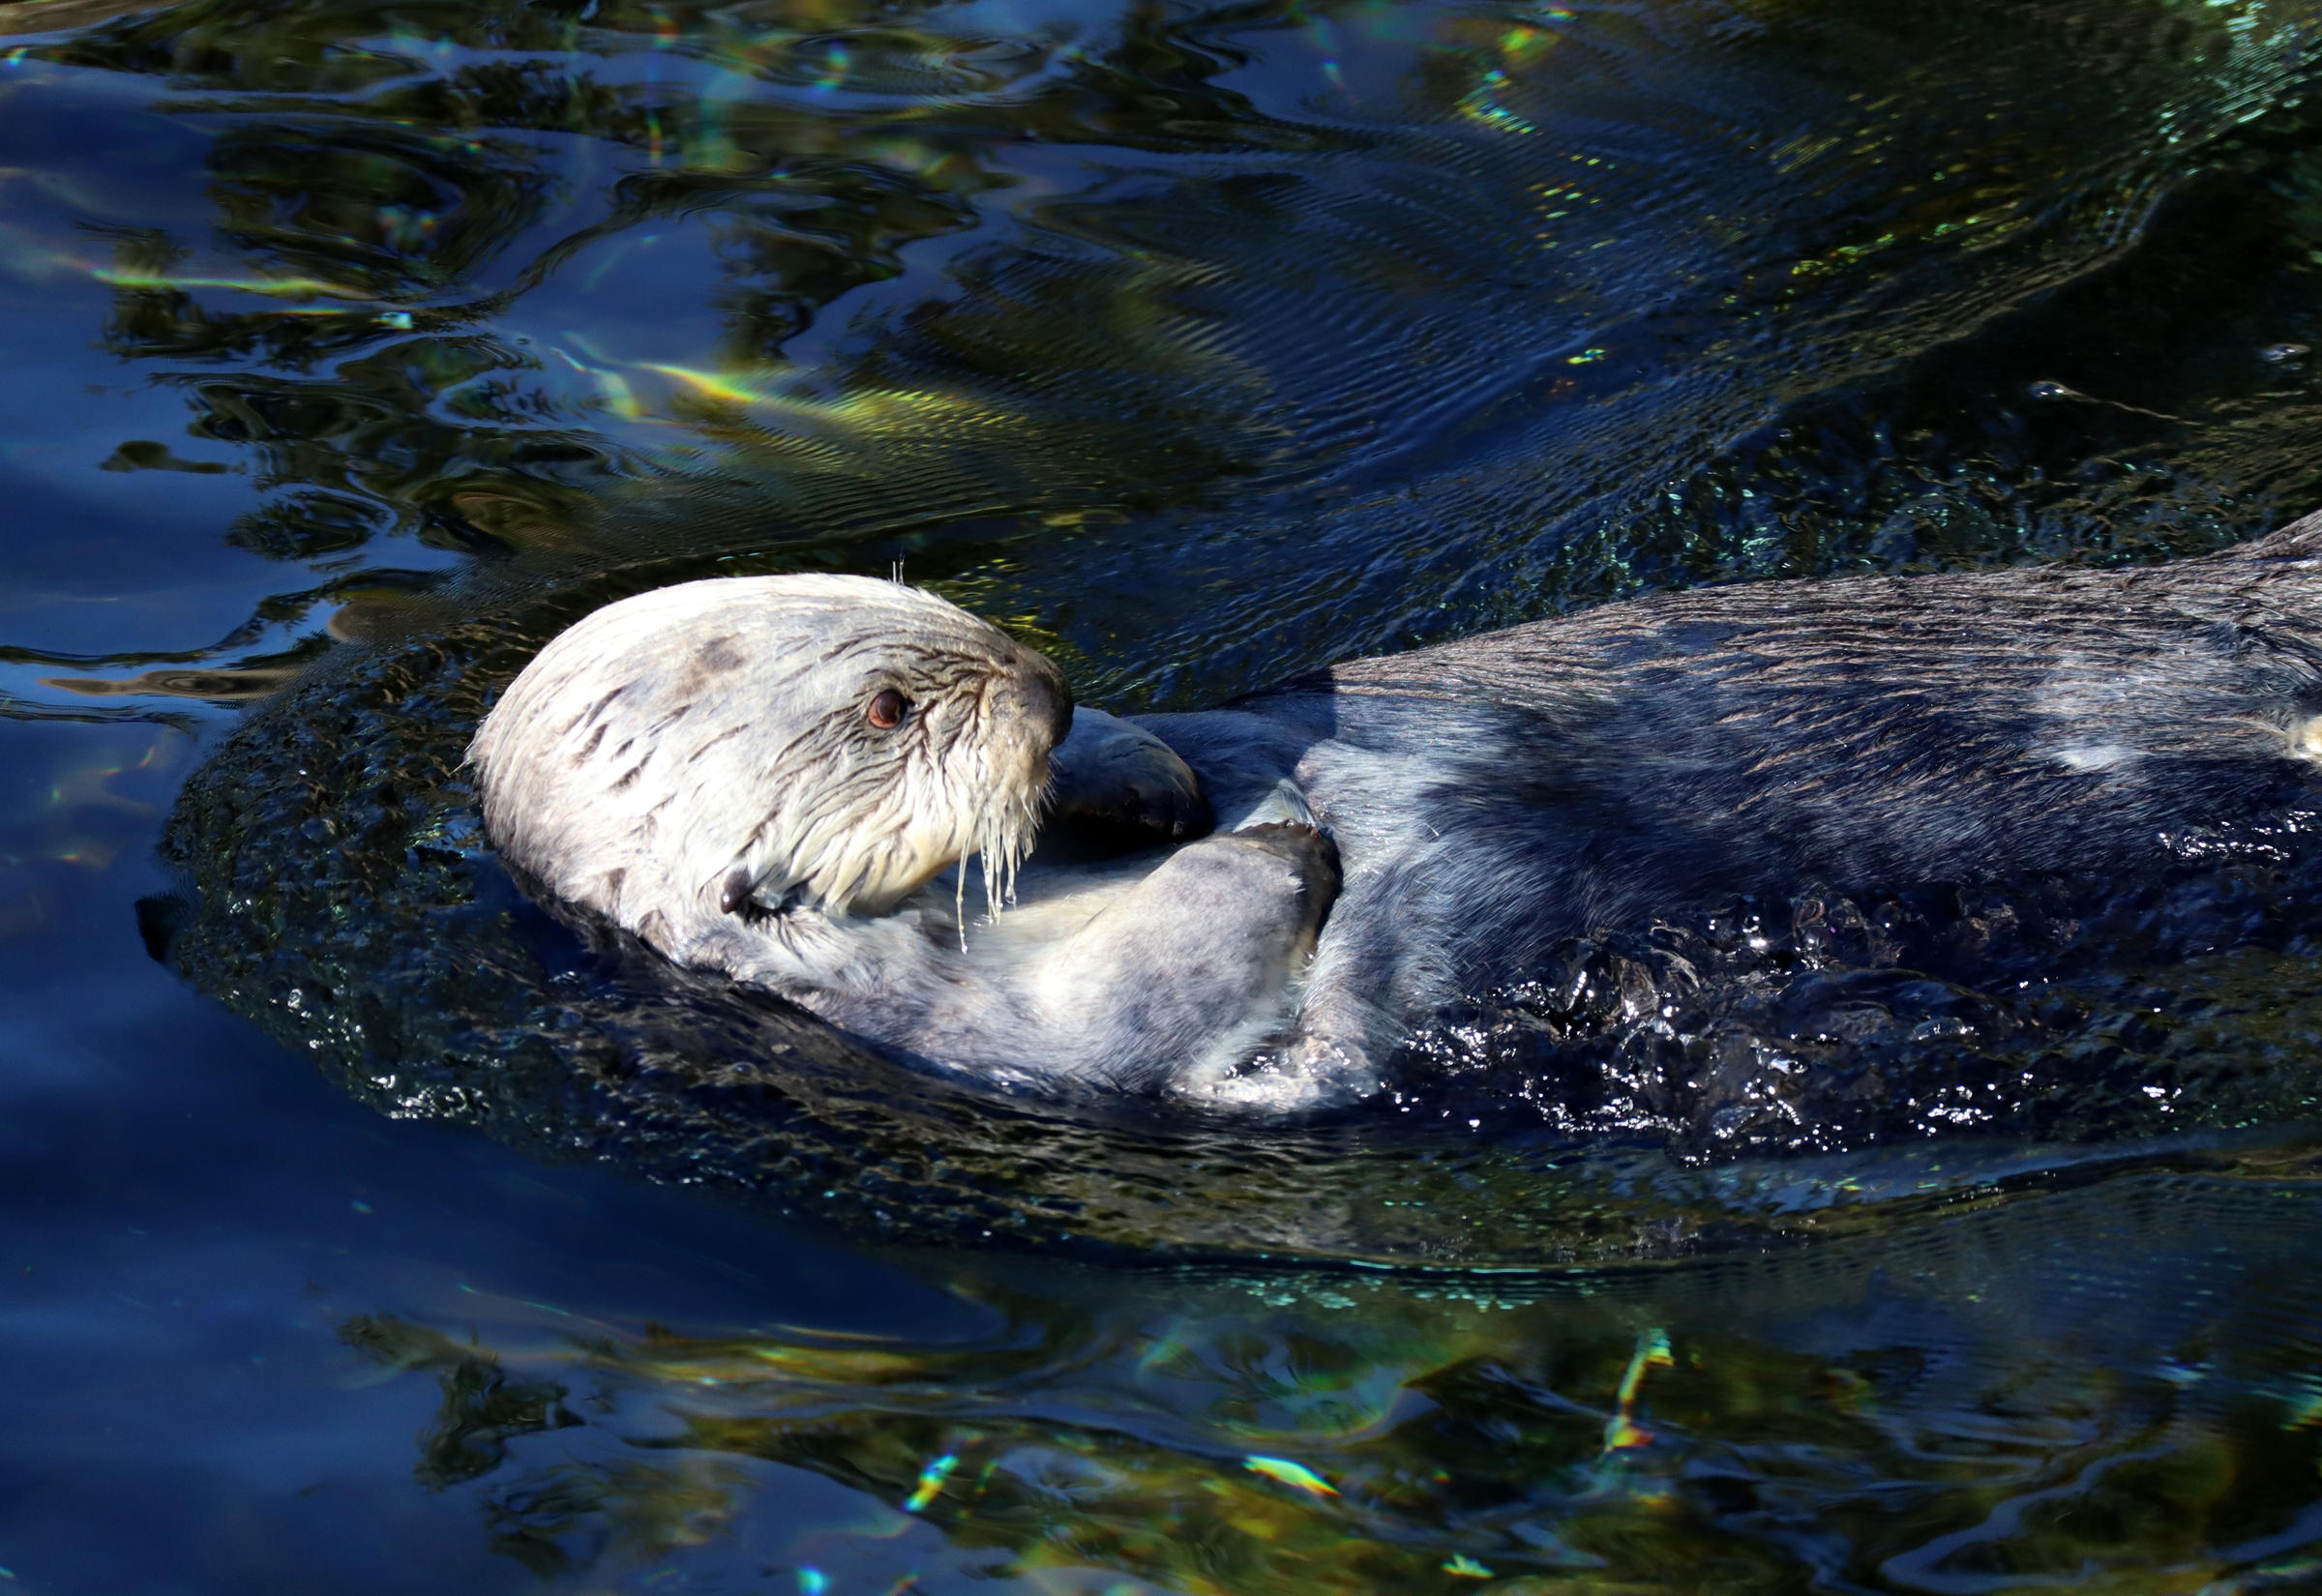 Otter fans float plan to bring sea otters back to Oregon coast | NW